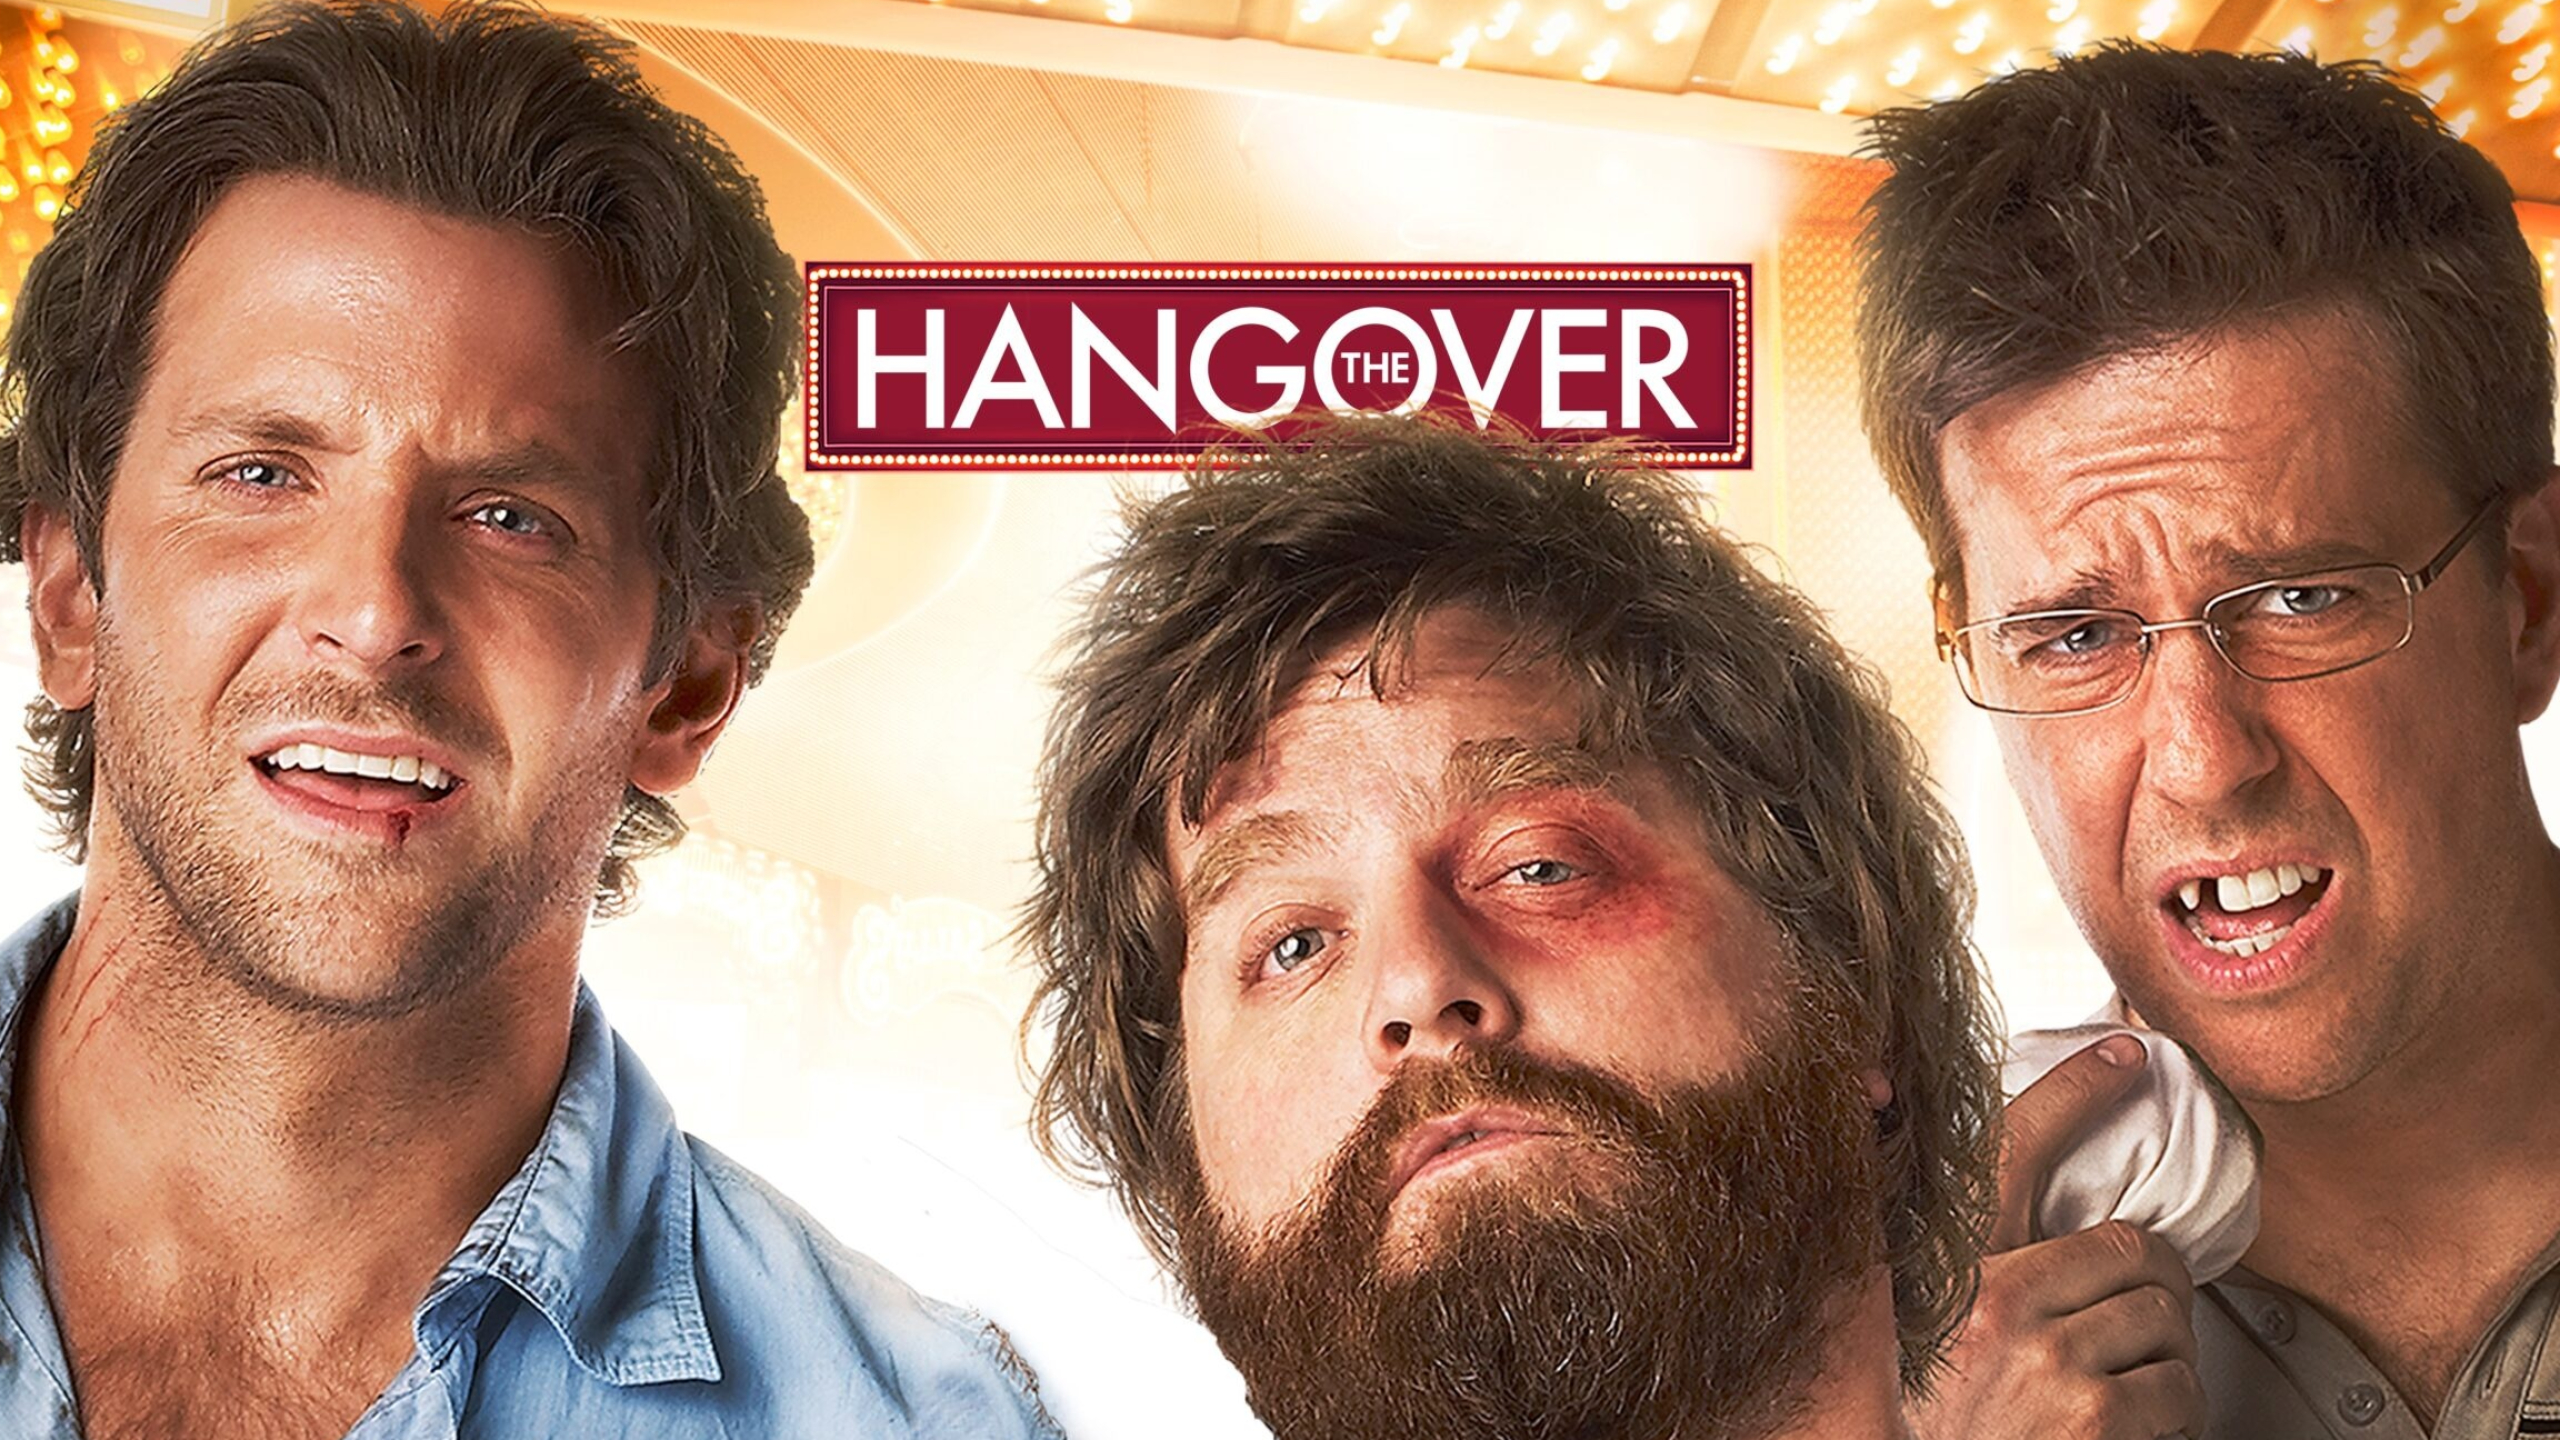 The Hangover: Three buddies wake up from a bachelor party in Las Vegas, Movie plot. 2560x1440 HD Wallpaper.